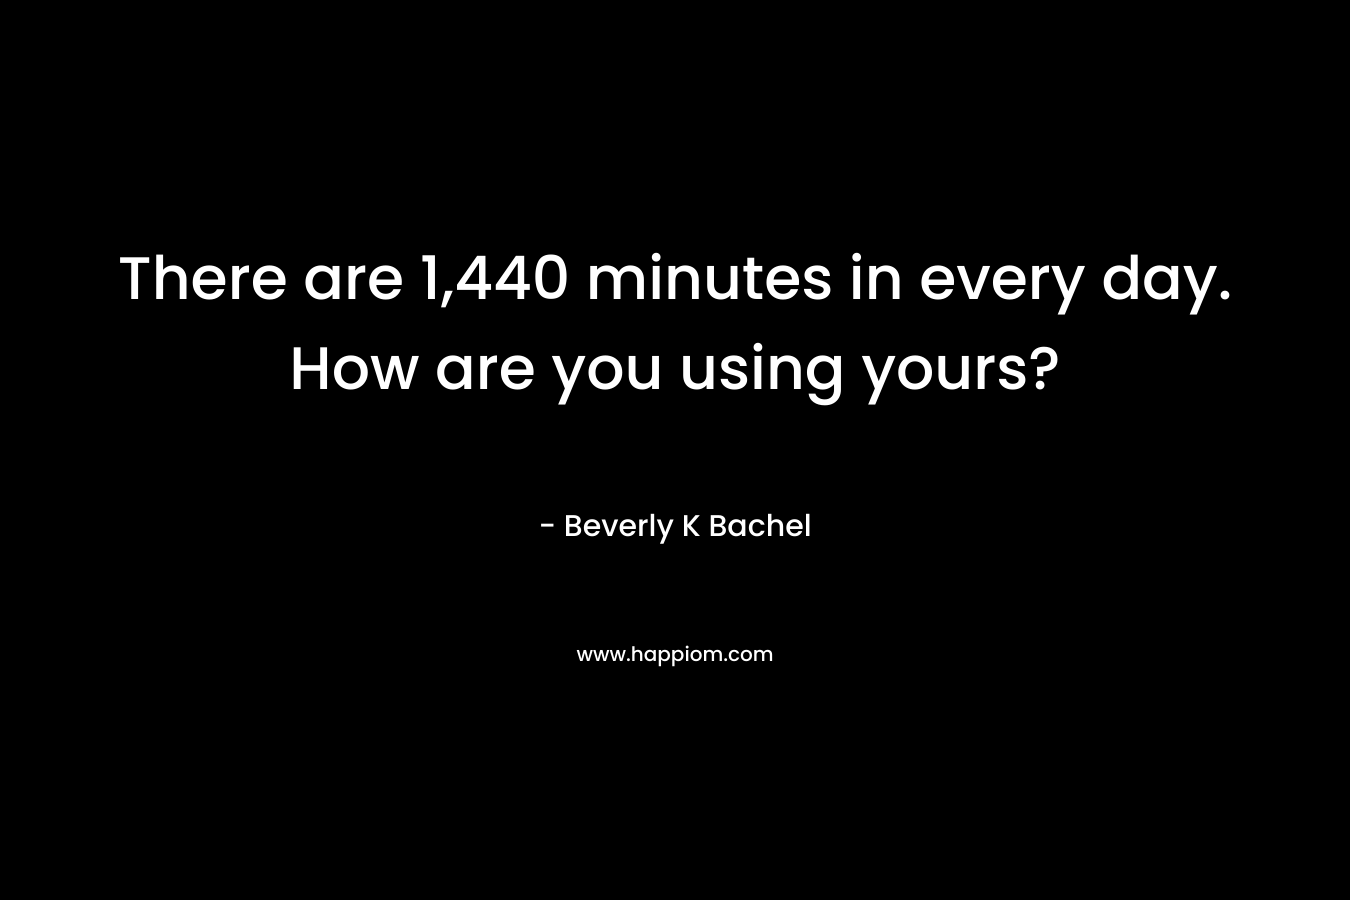 There are 1,440 minutes in every day. How are you using yours?